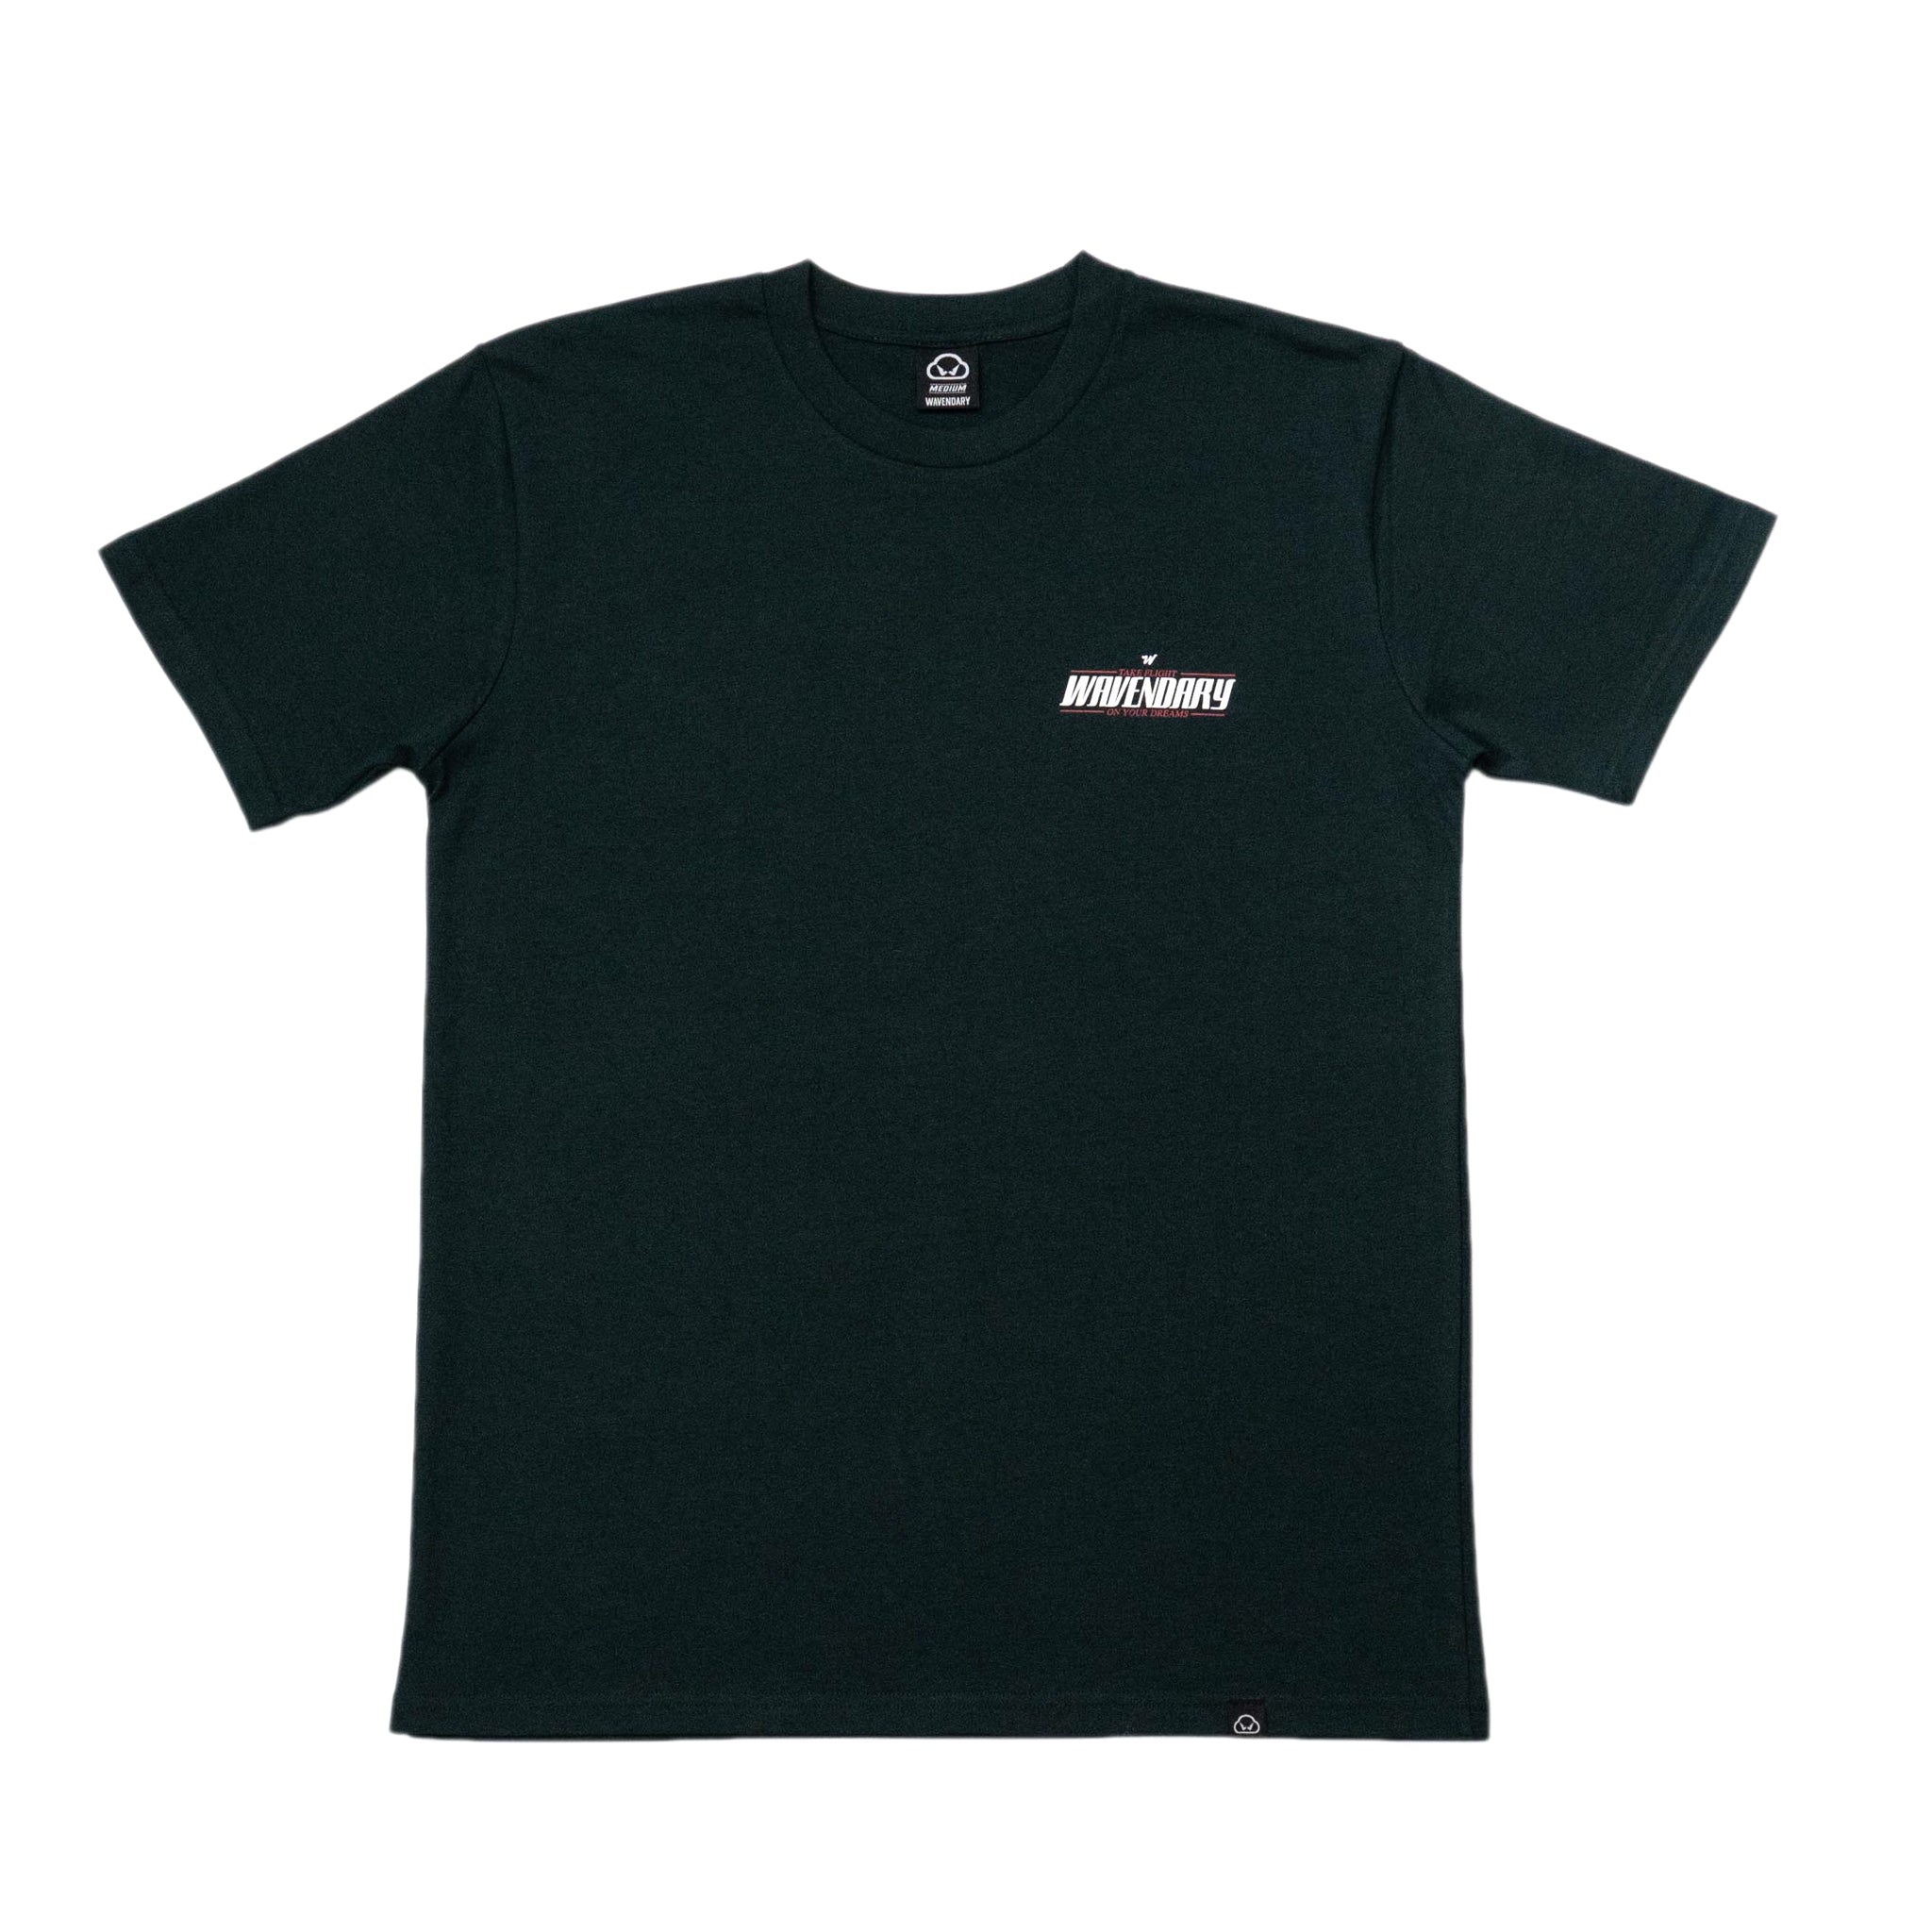 VISIONARY T-SHIRT - FOREST GREEN